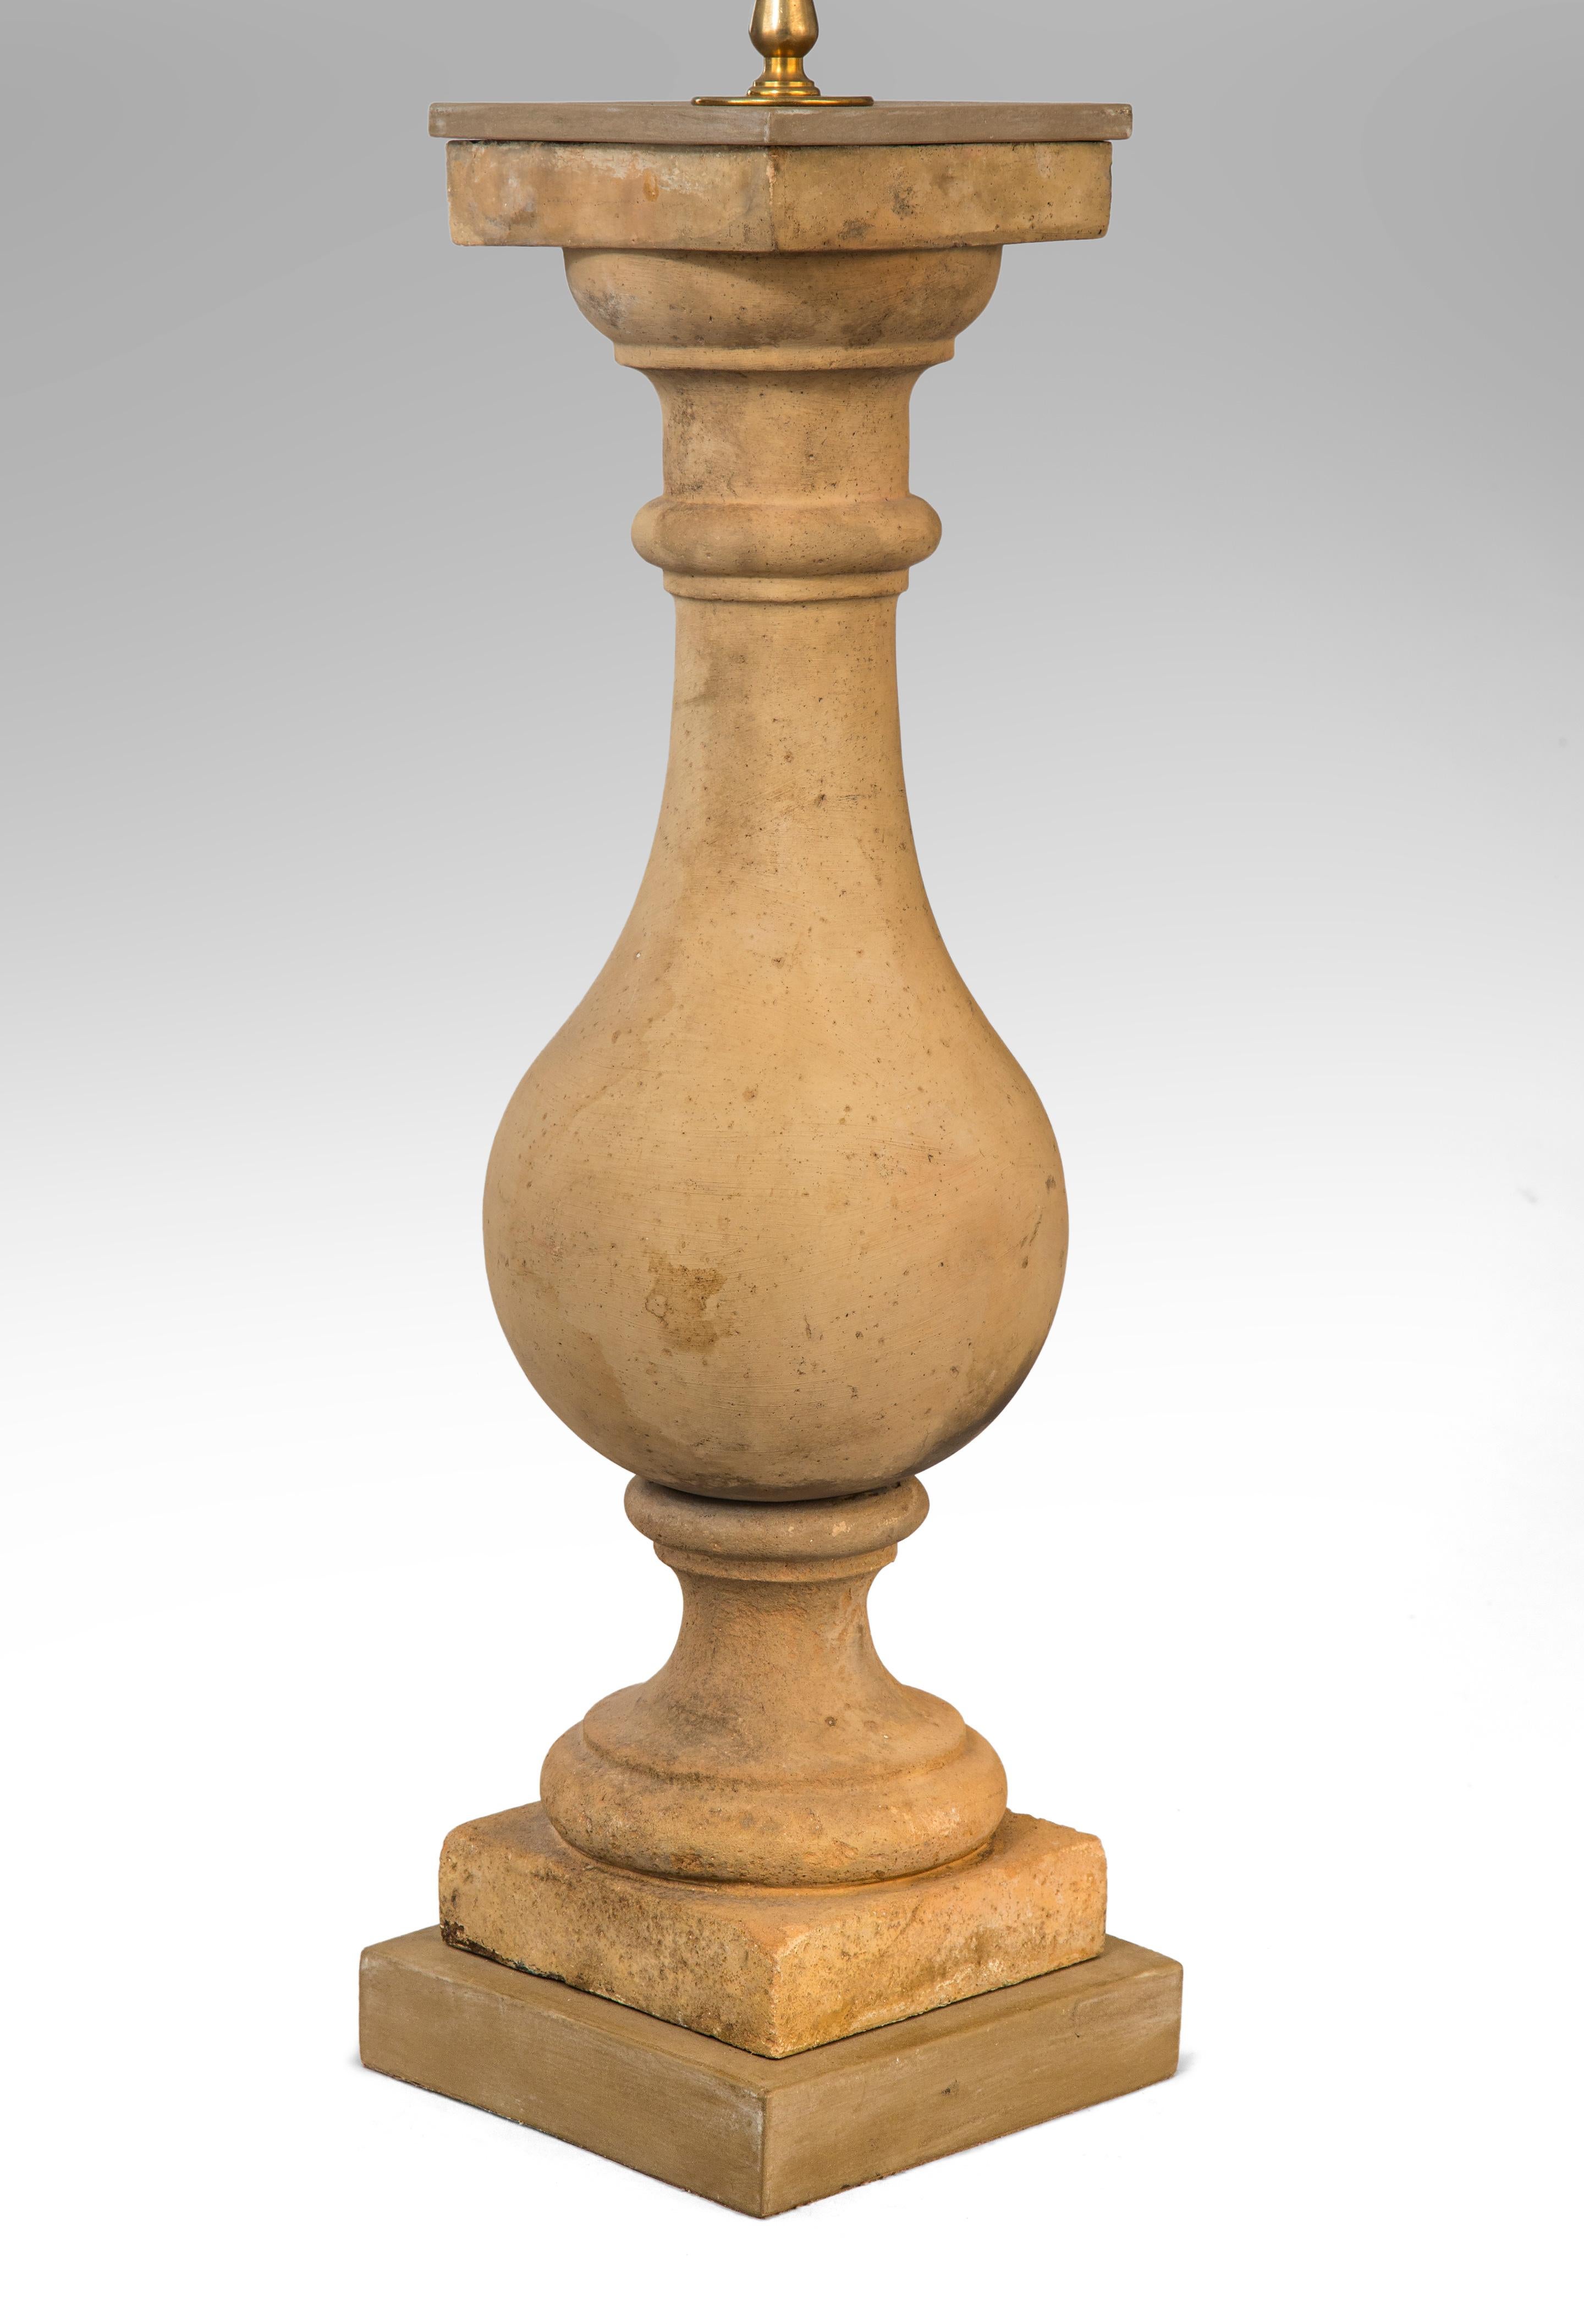 A pair of tall French neoclassical terracotta Baluster lamps
19th century
Great looking lamps of beautiful proportion and color. Each with a generously scaled baluster standard resting on a socle above a square base. Shades included.
Height of